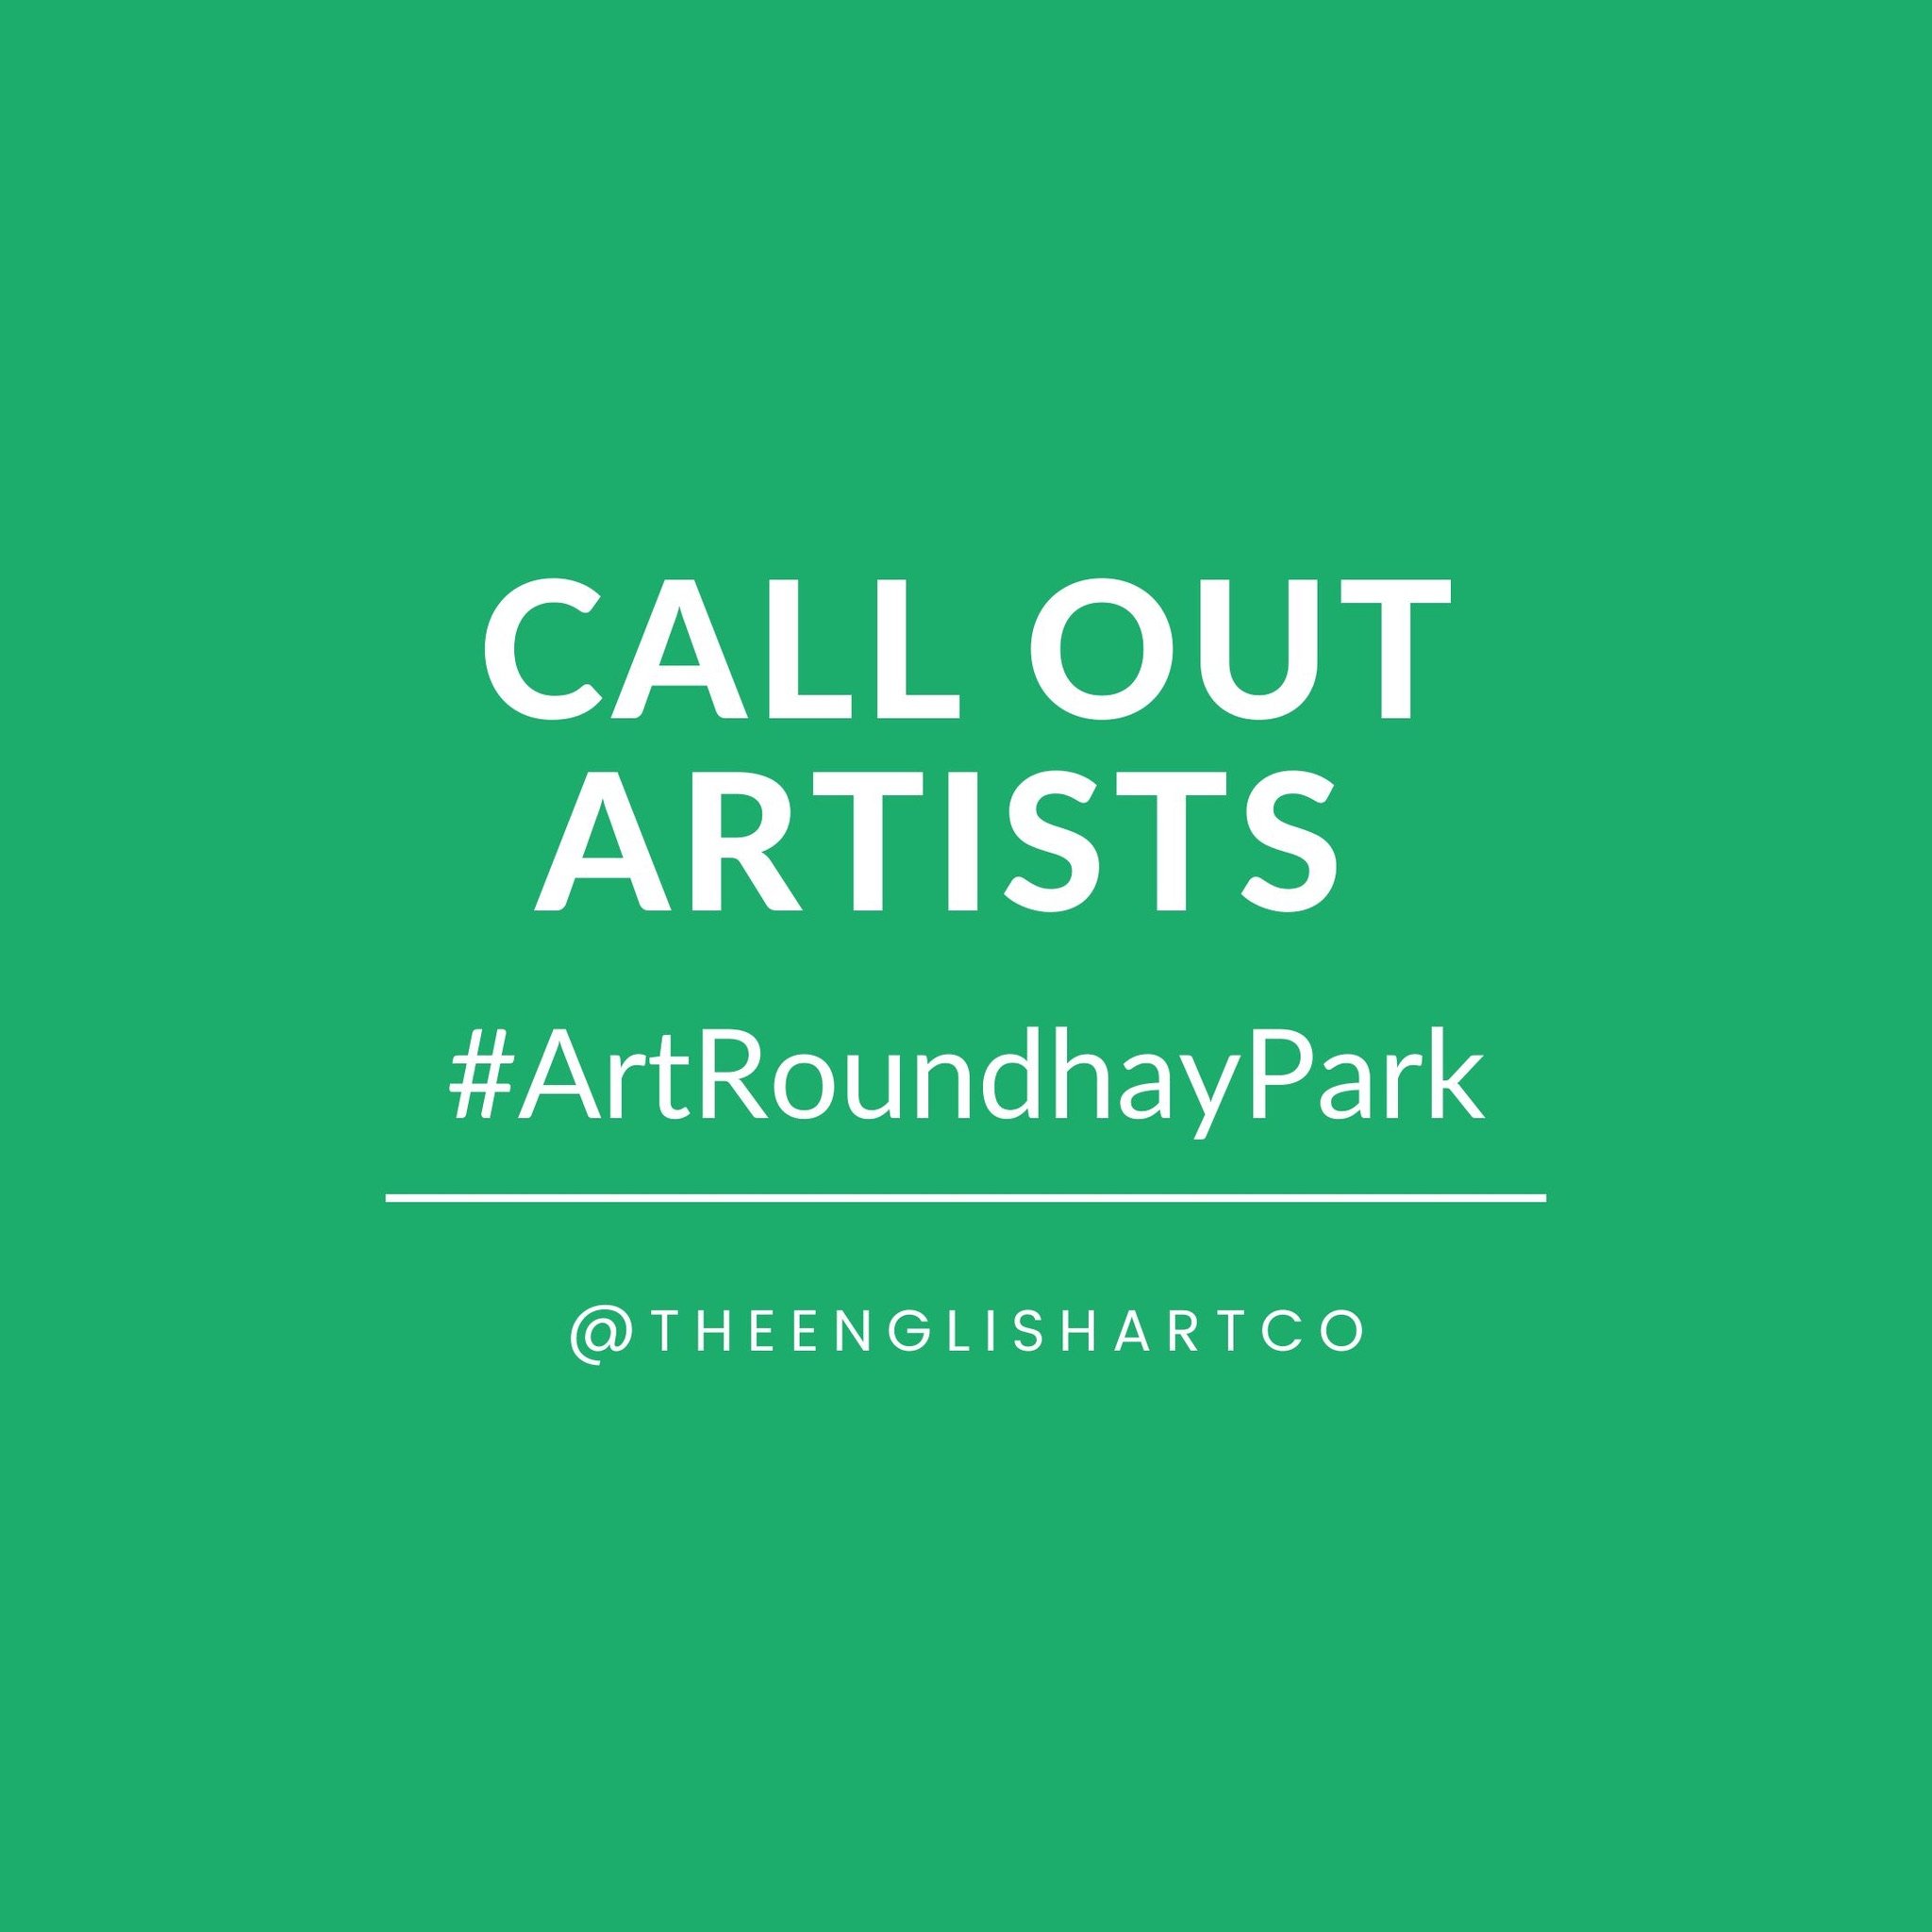 🚨 ONE WEEK TO GO 🚨

Calling all Northern artists! This is your reminder that you have just one week to submit your work for our Summer exhibition 🖼

We're looking for a cross-section of work that is created and produced in Leeds, Yorkshire and the